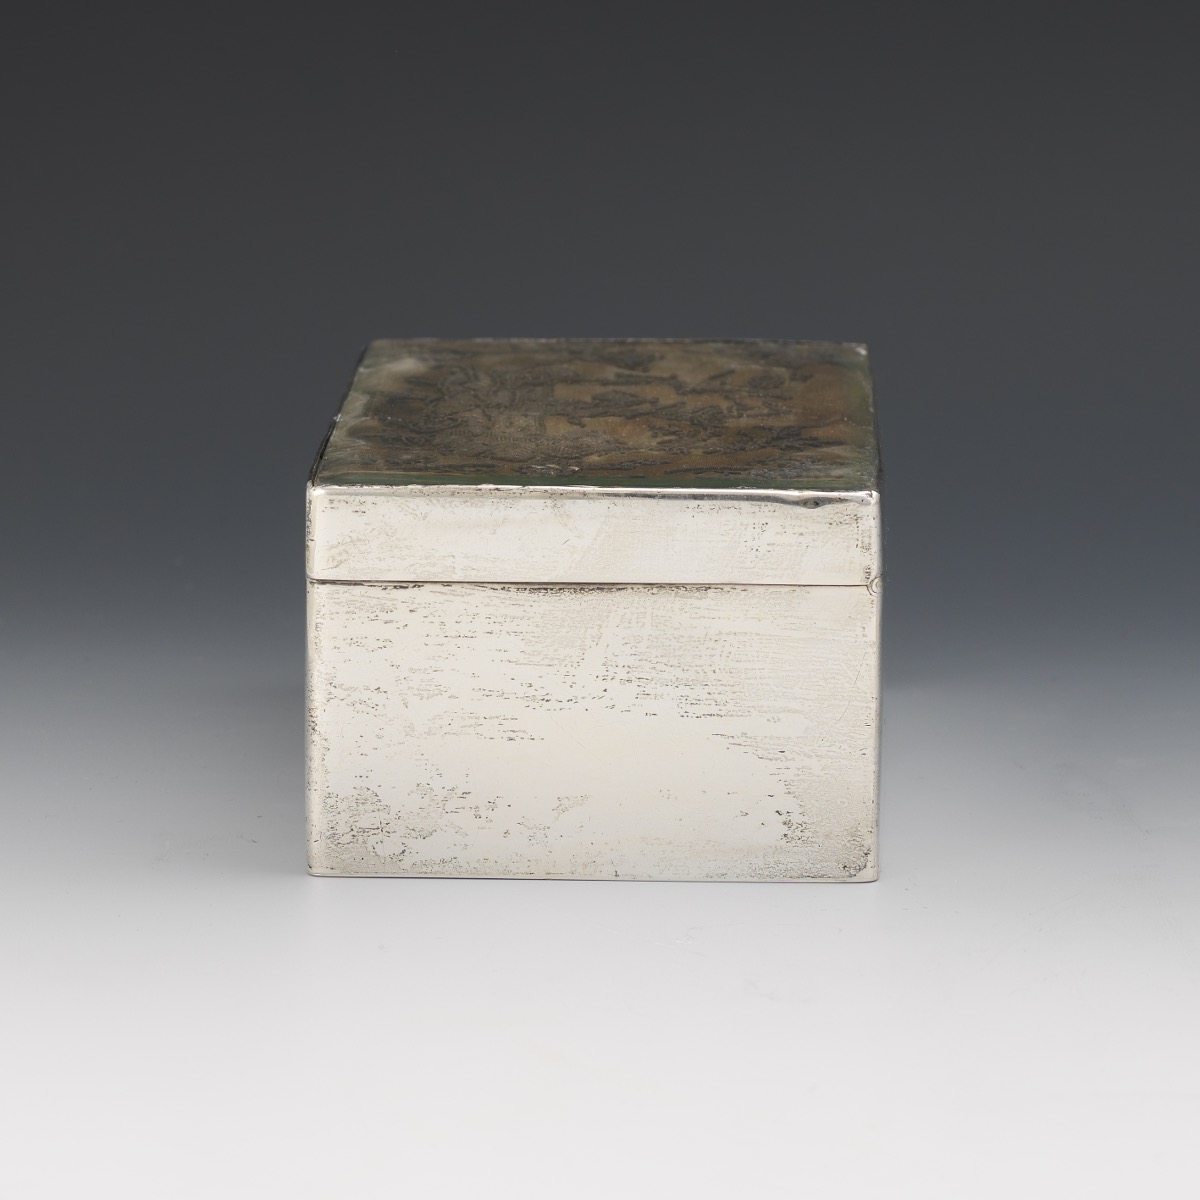 English Sterling Silver And Antique Brocade Box, Retailed by Dreyfous, London, ca. 1899 - Image 4 of 9